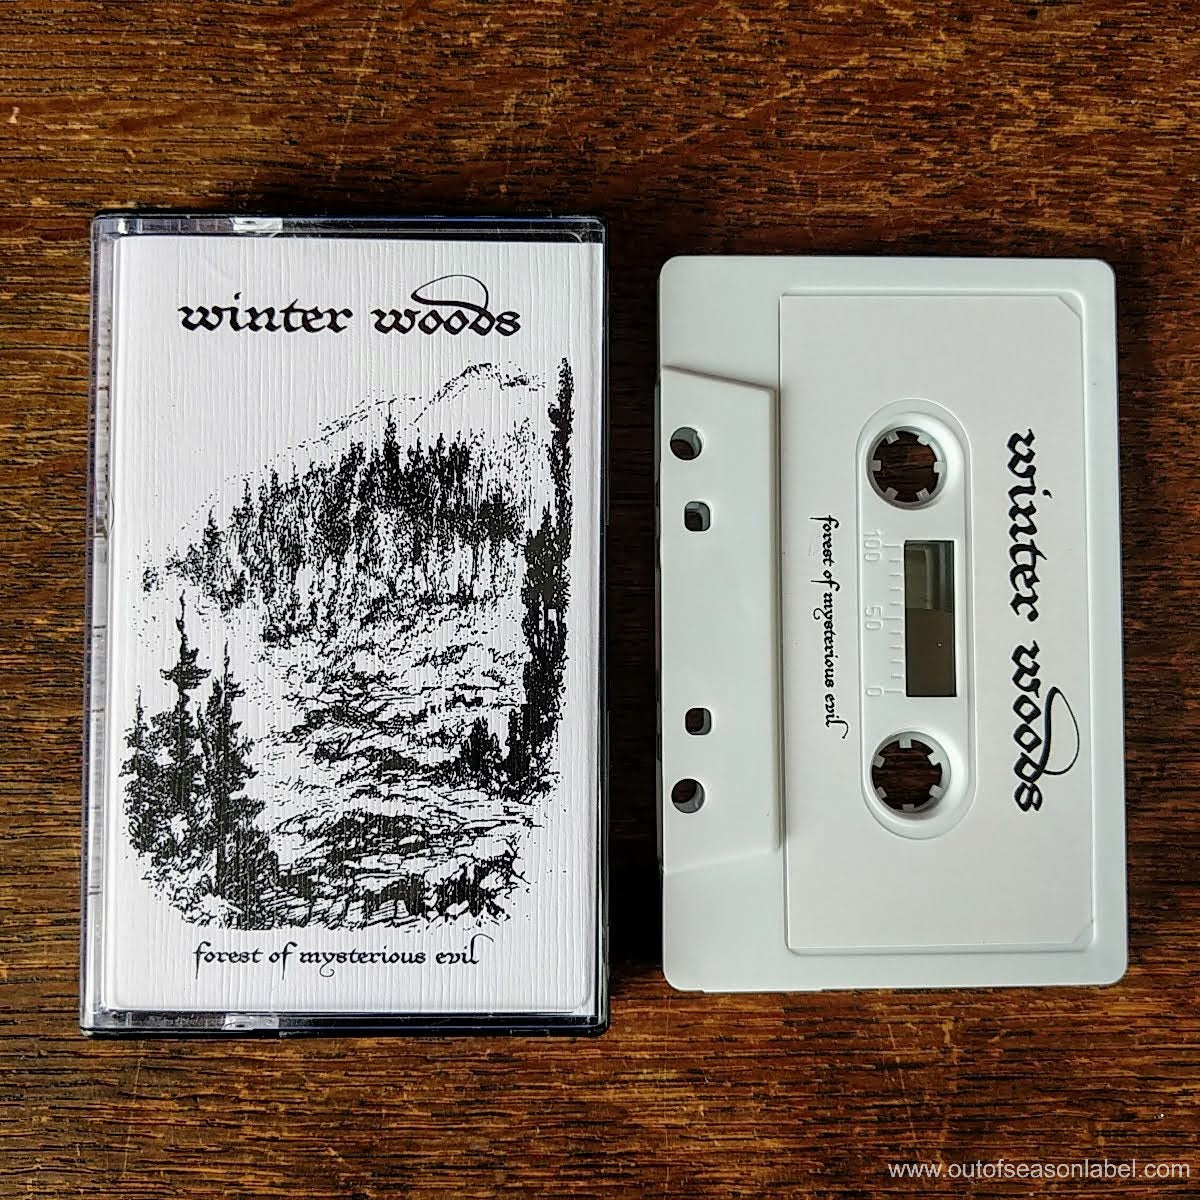 [SOLD OUT] WINTER WOODS "Forest of Mysterious Evil" Cassette Tape